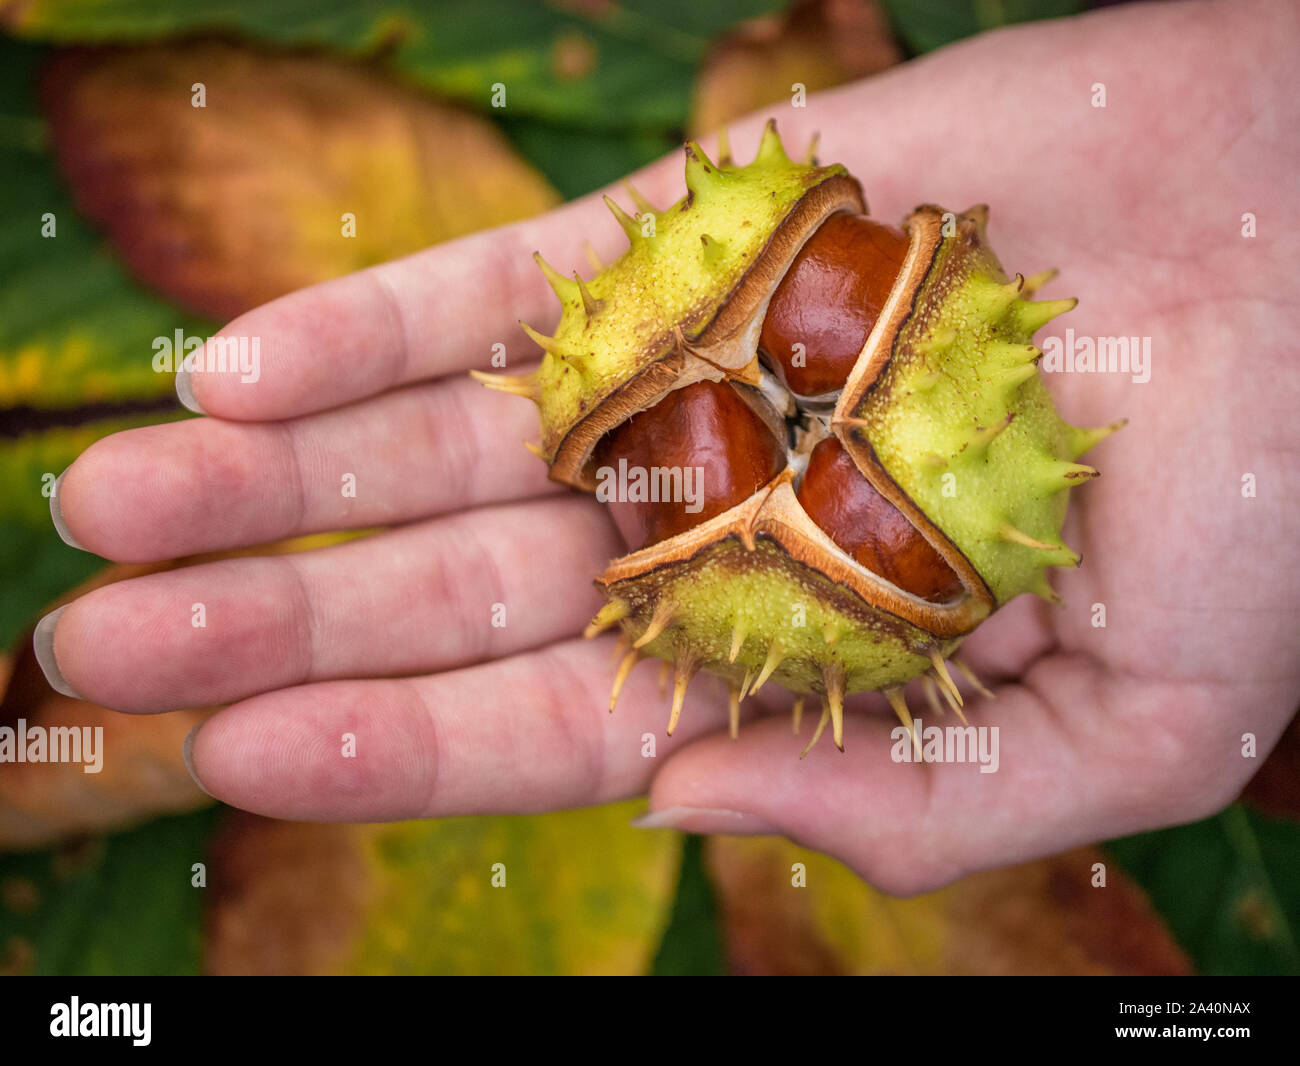 Female hand holds uniformly cracked shell of a chestnut with three nuts inside, colorful chestnut leaves in the background, autumn mood Stock Photo